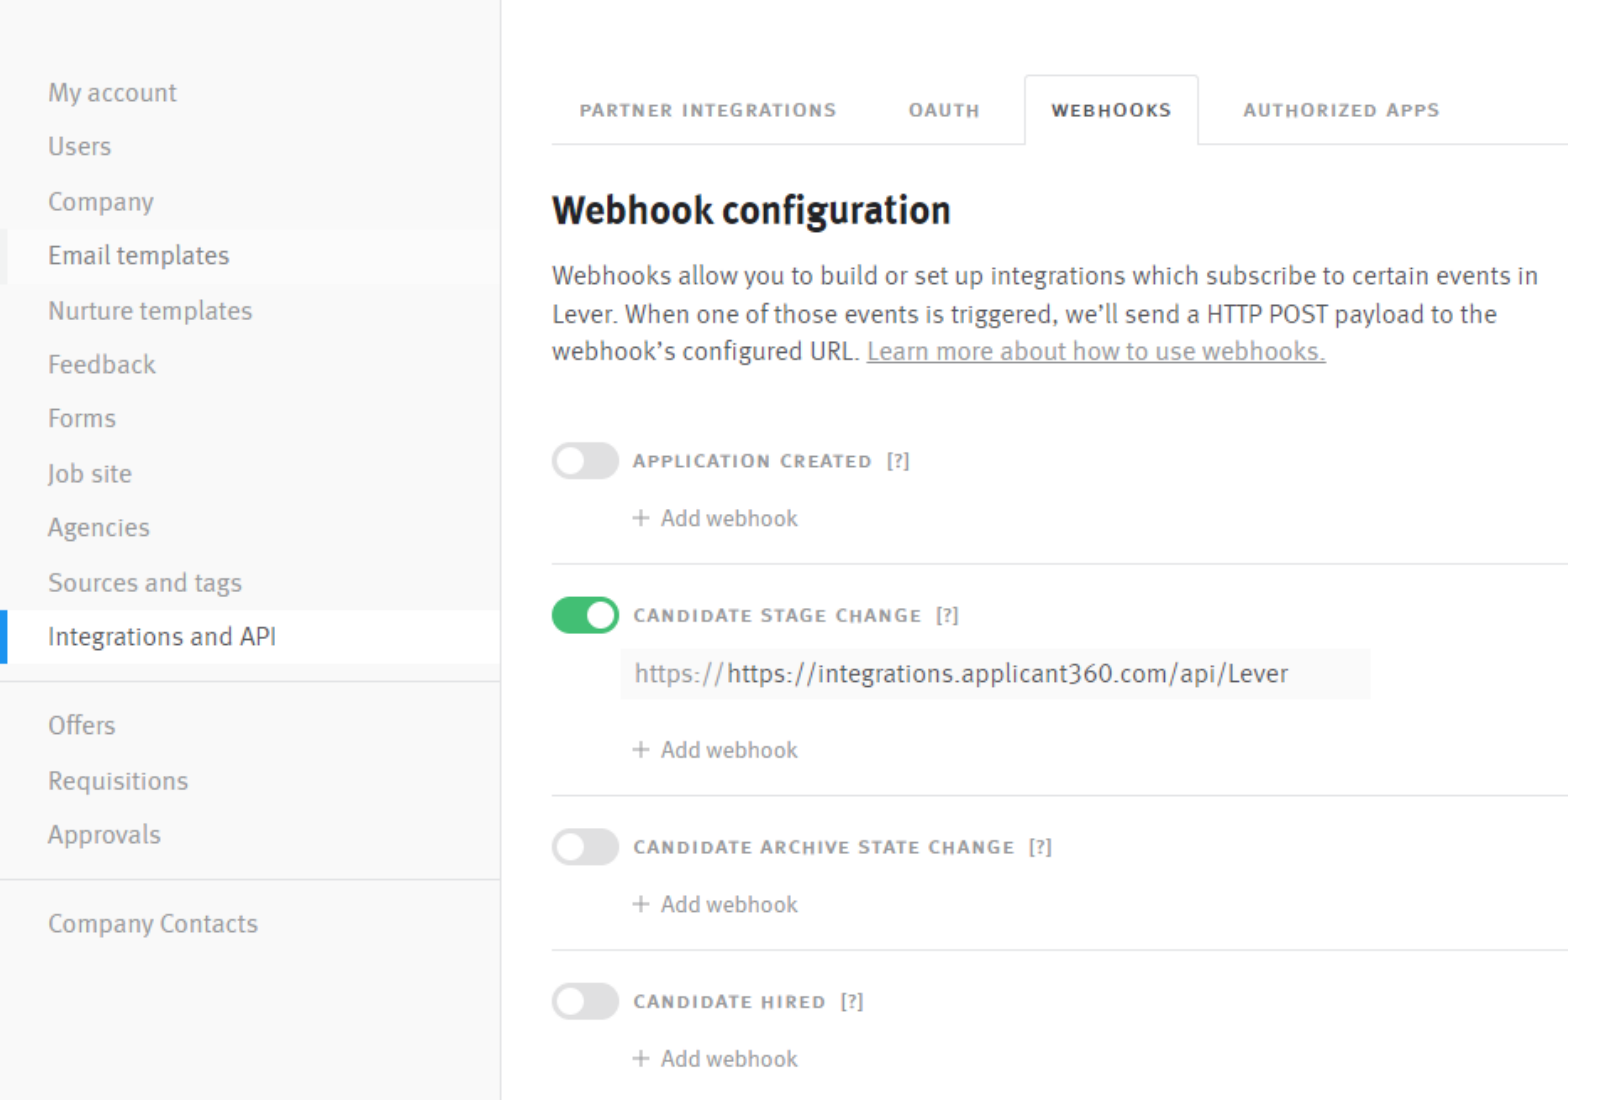 Lever platform integrations and API page with webhooks tab and candidate stage change toggle on green.